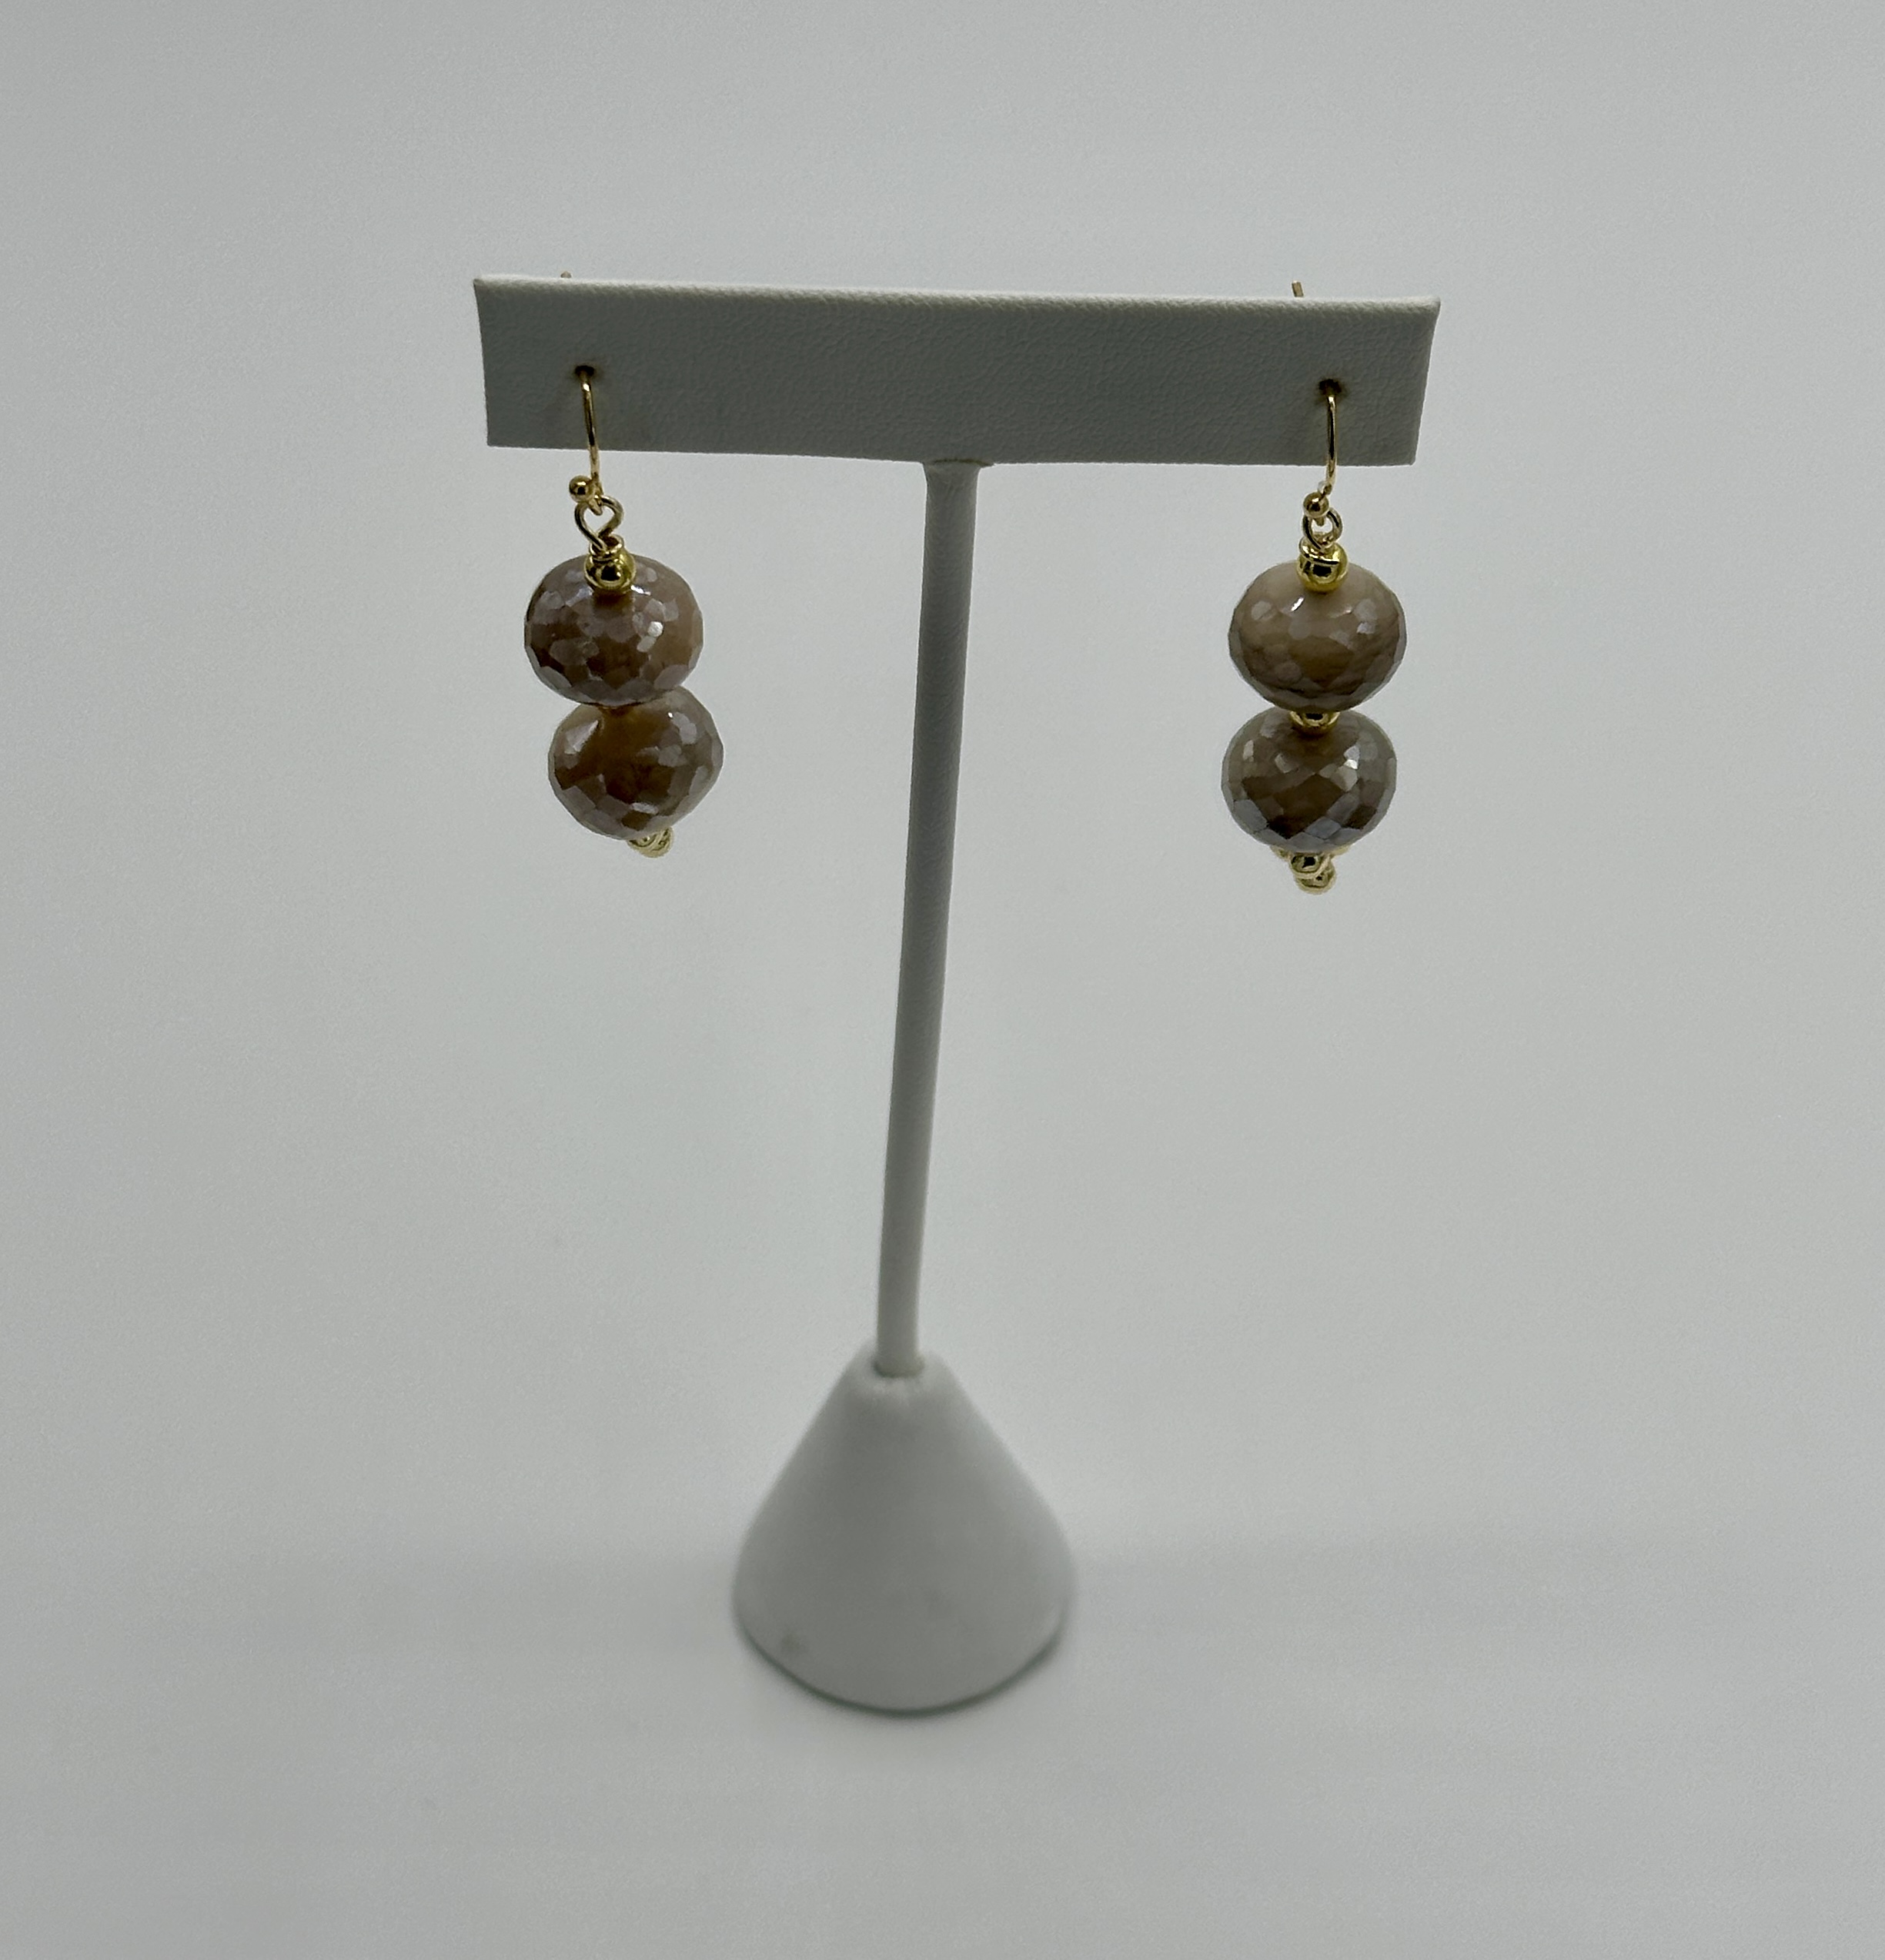 Large 15 mm Mystic Moonstone Beads, Rondell in Shape on Gold Filled Earrings